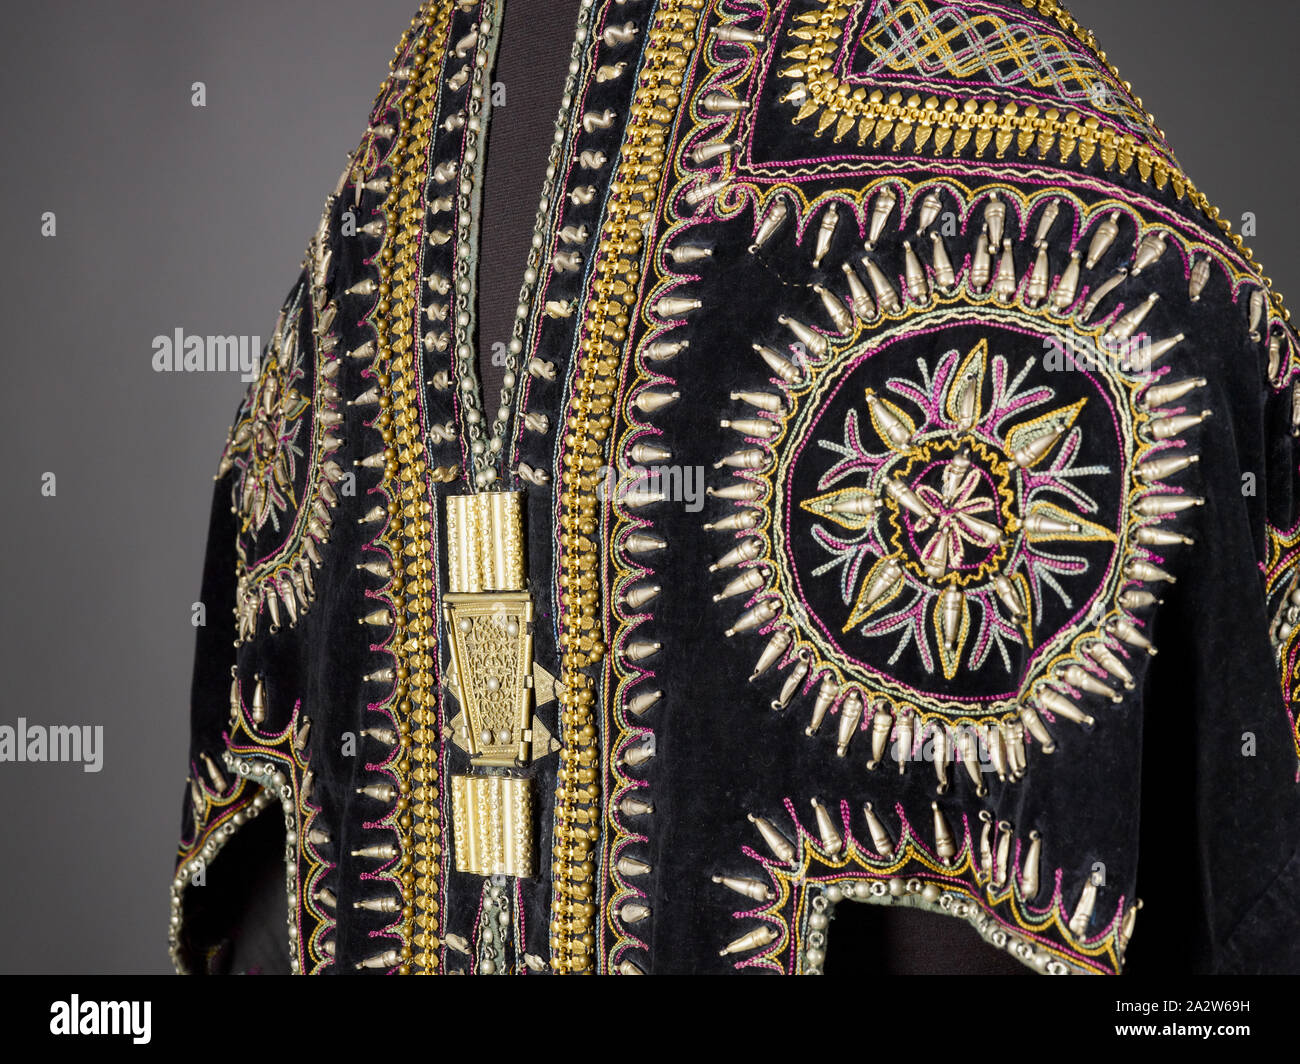 ceremonial tunic, Amharic people, early 1900s, silk velvet, metal ornaments, 37-1/2 x 63-1/2 in., Textile and Fashion Arts Stock Photo